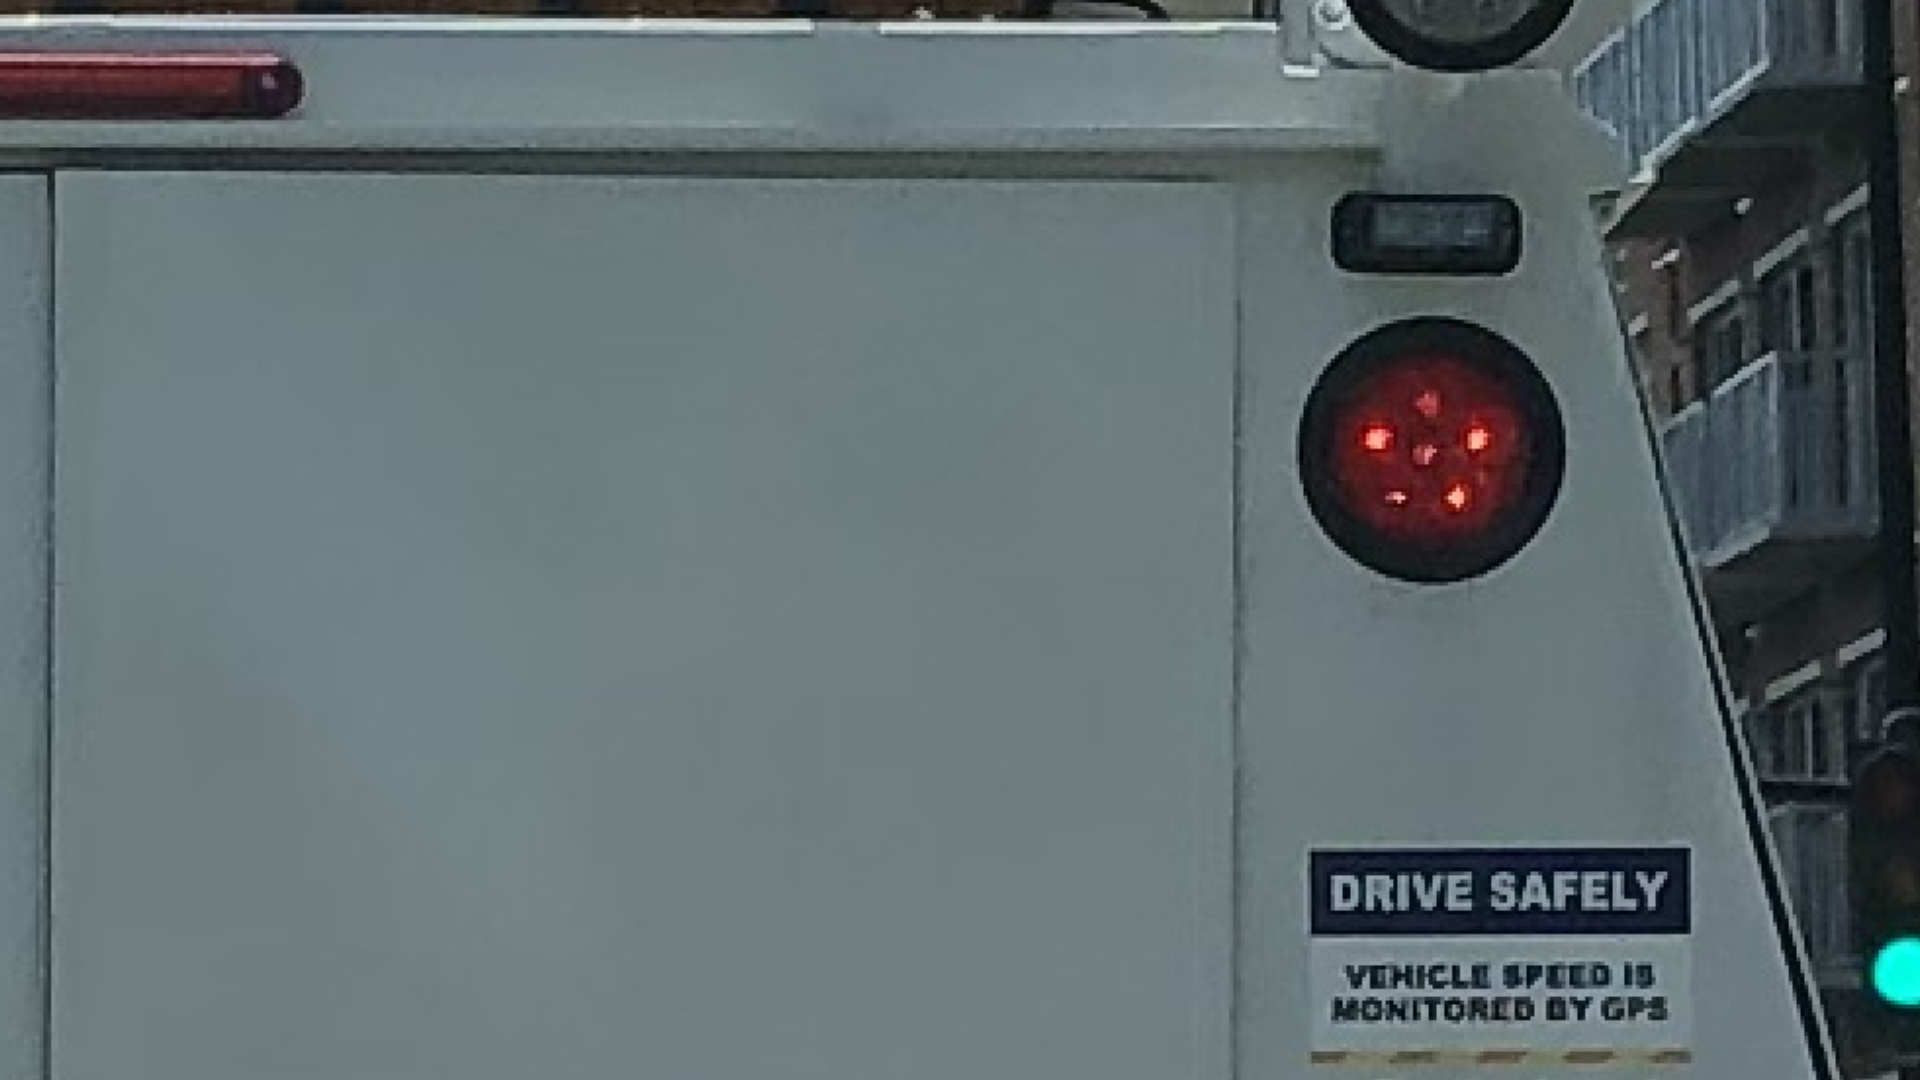 The Verify team was curious to find out if a sticker that says "Drive Safely. Vehicle speed is monitored by GPS" on a Pepco vehicle was actually legit.